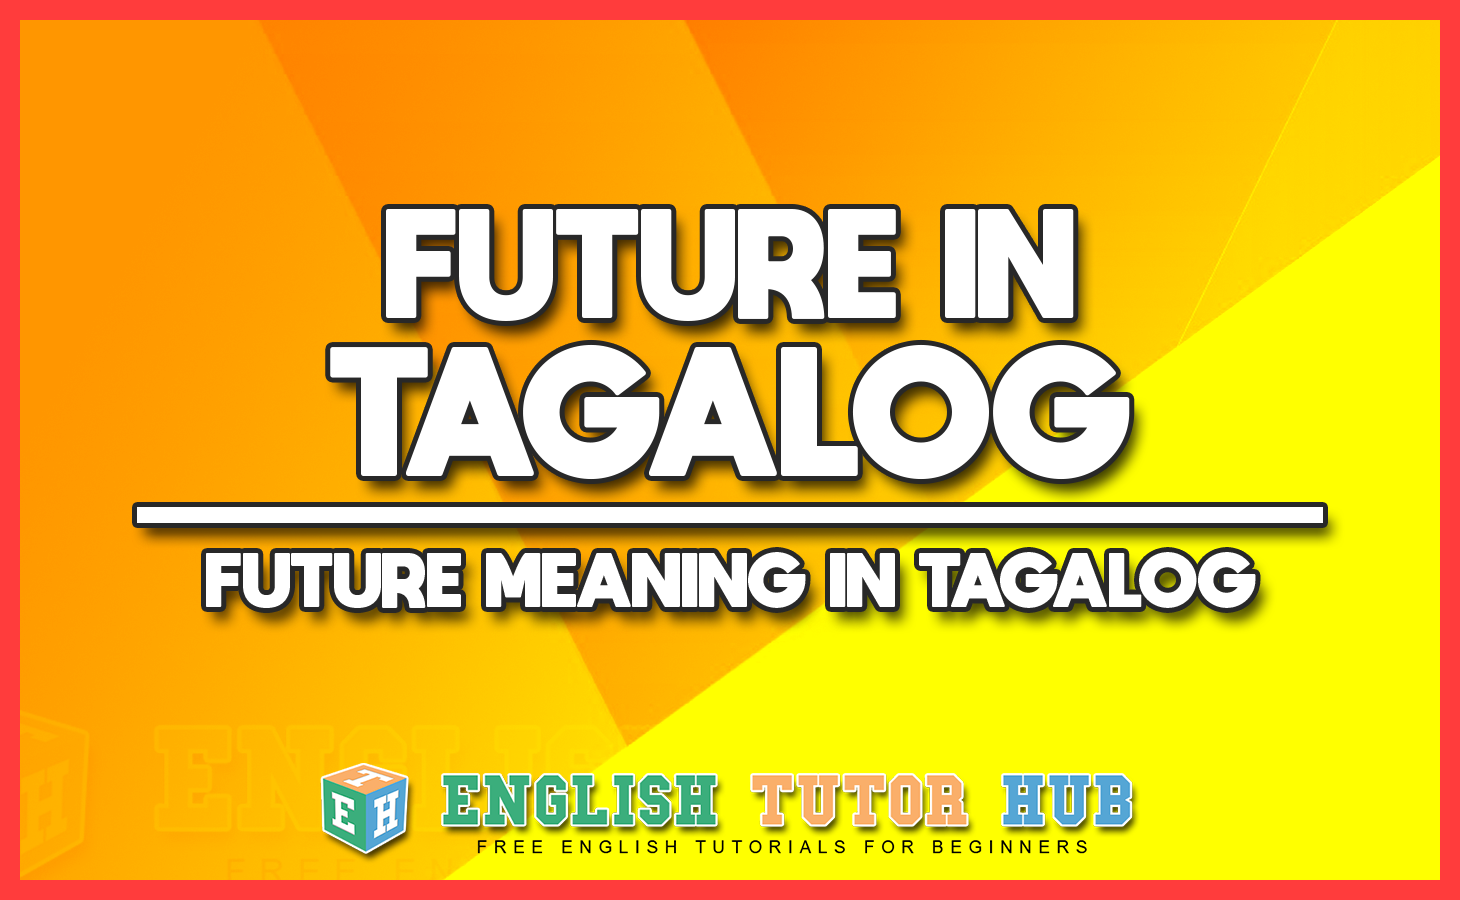 FUTURE IN TAGALOG - FUTURE MEANING IN TAGALOG